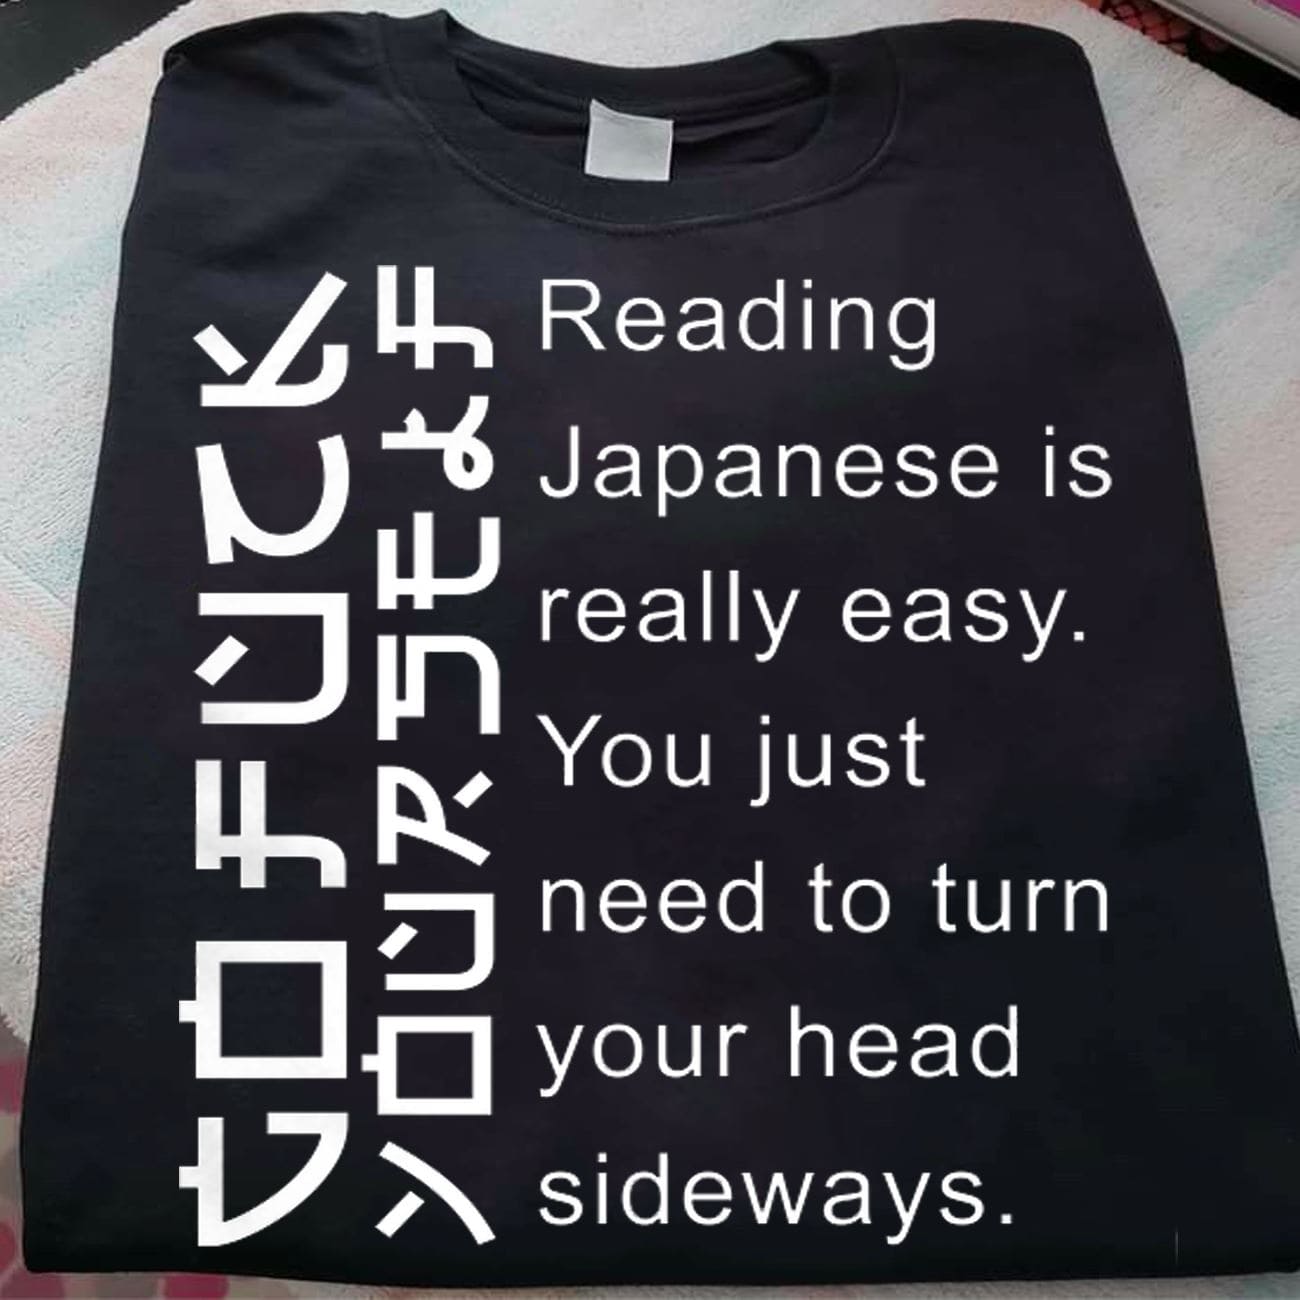 Reading Japanese is really easy, you just need to turn your head sideways - Go fuck yourself